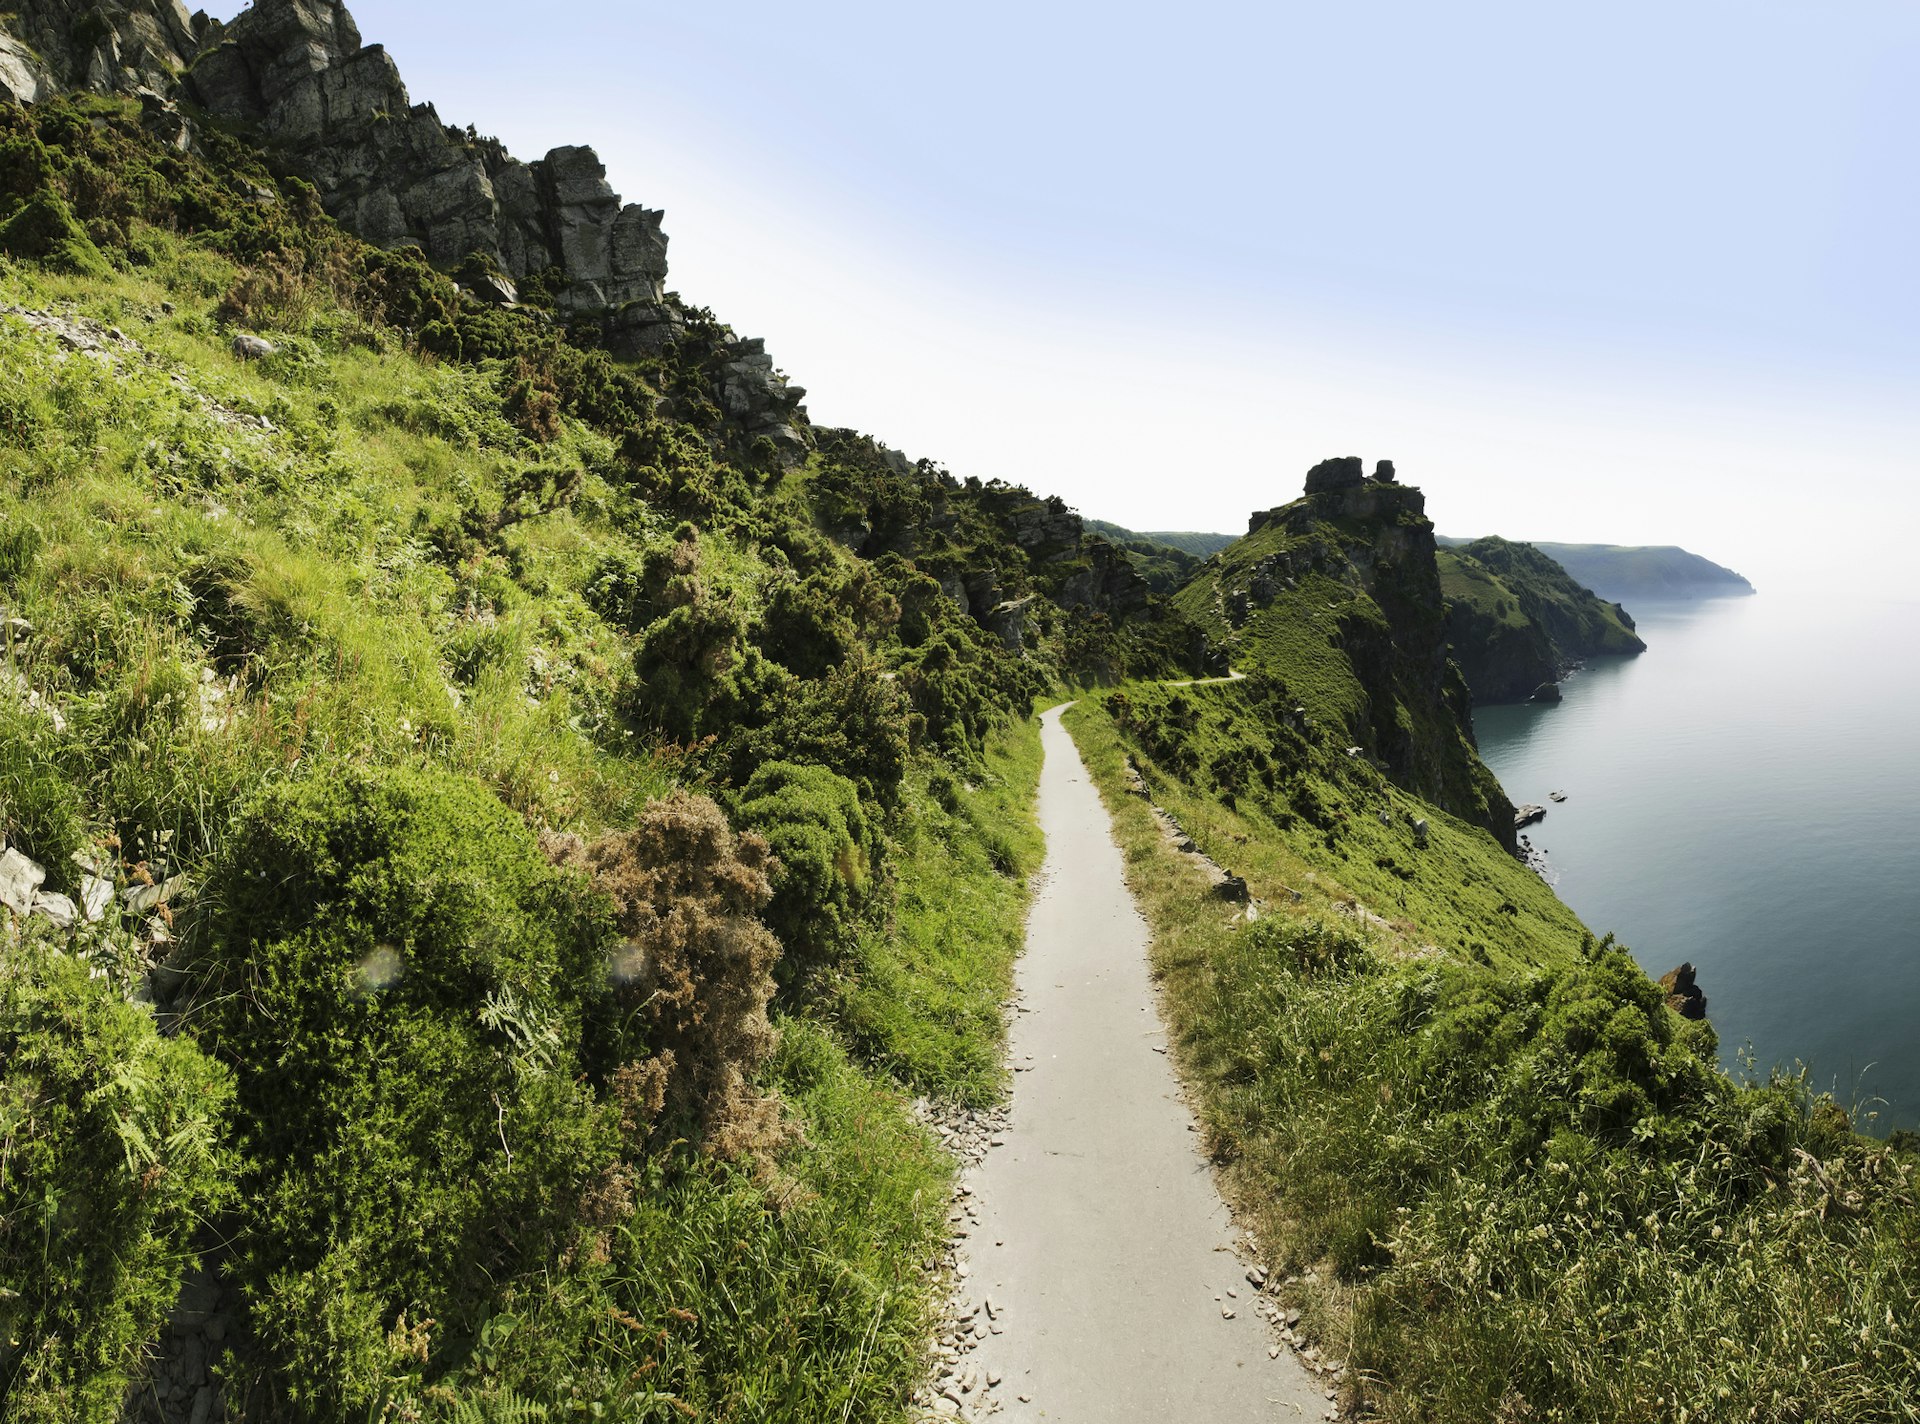 The coastal path to Lymouth along the coast of the Valley of the Rocks